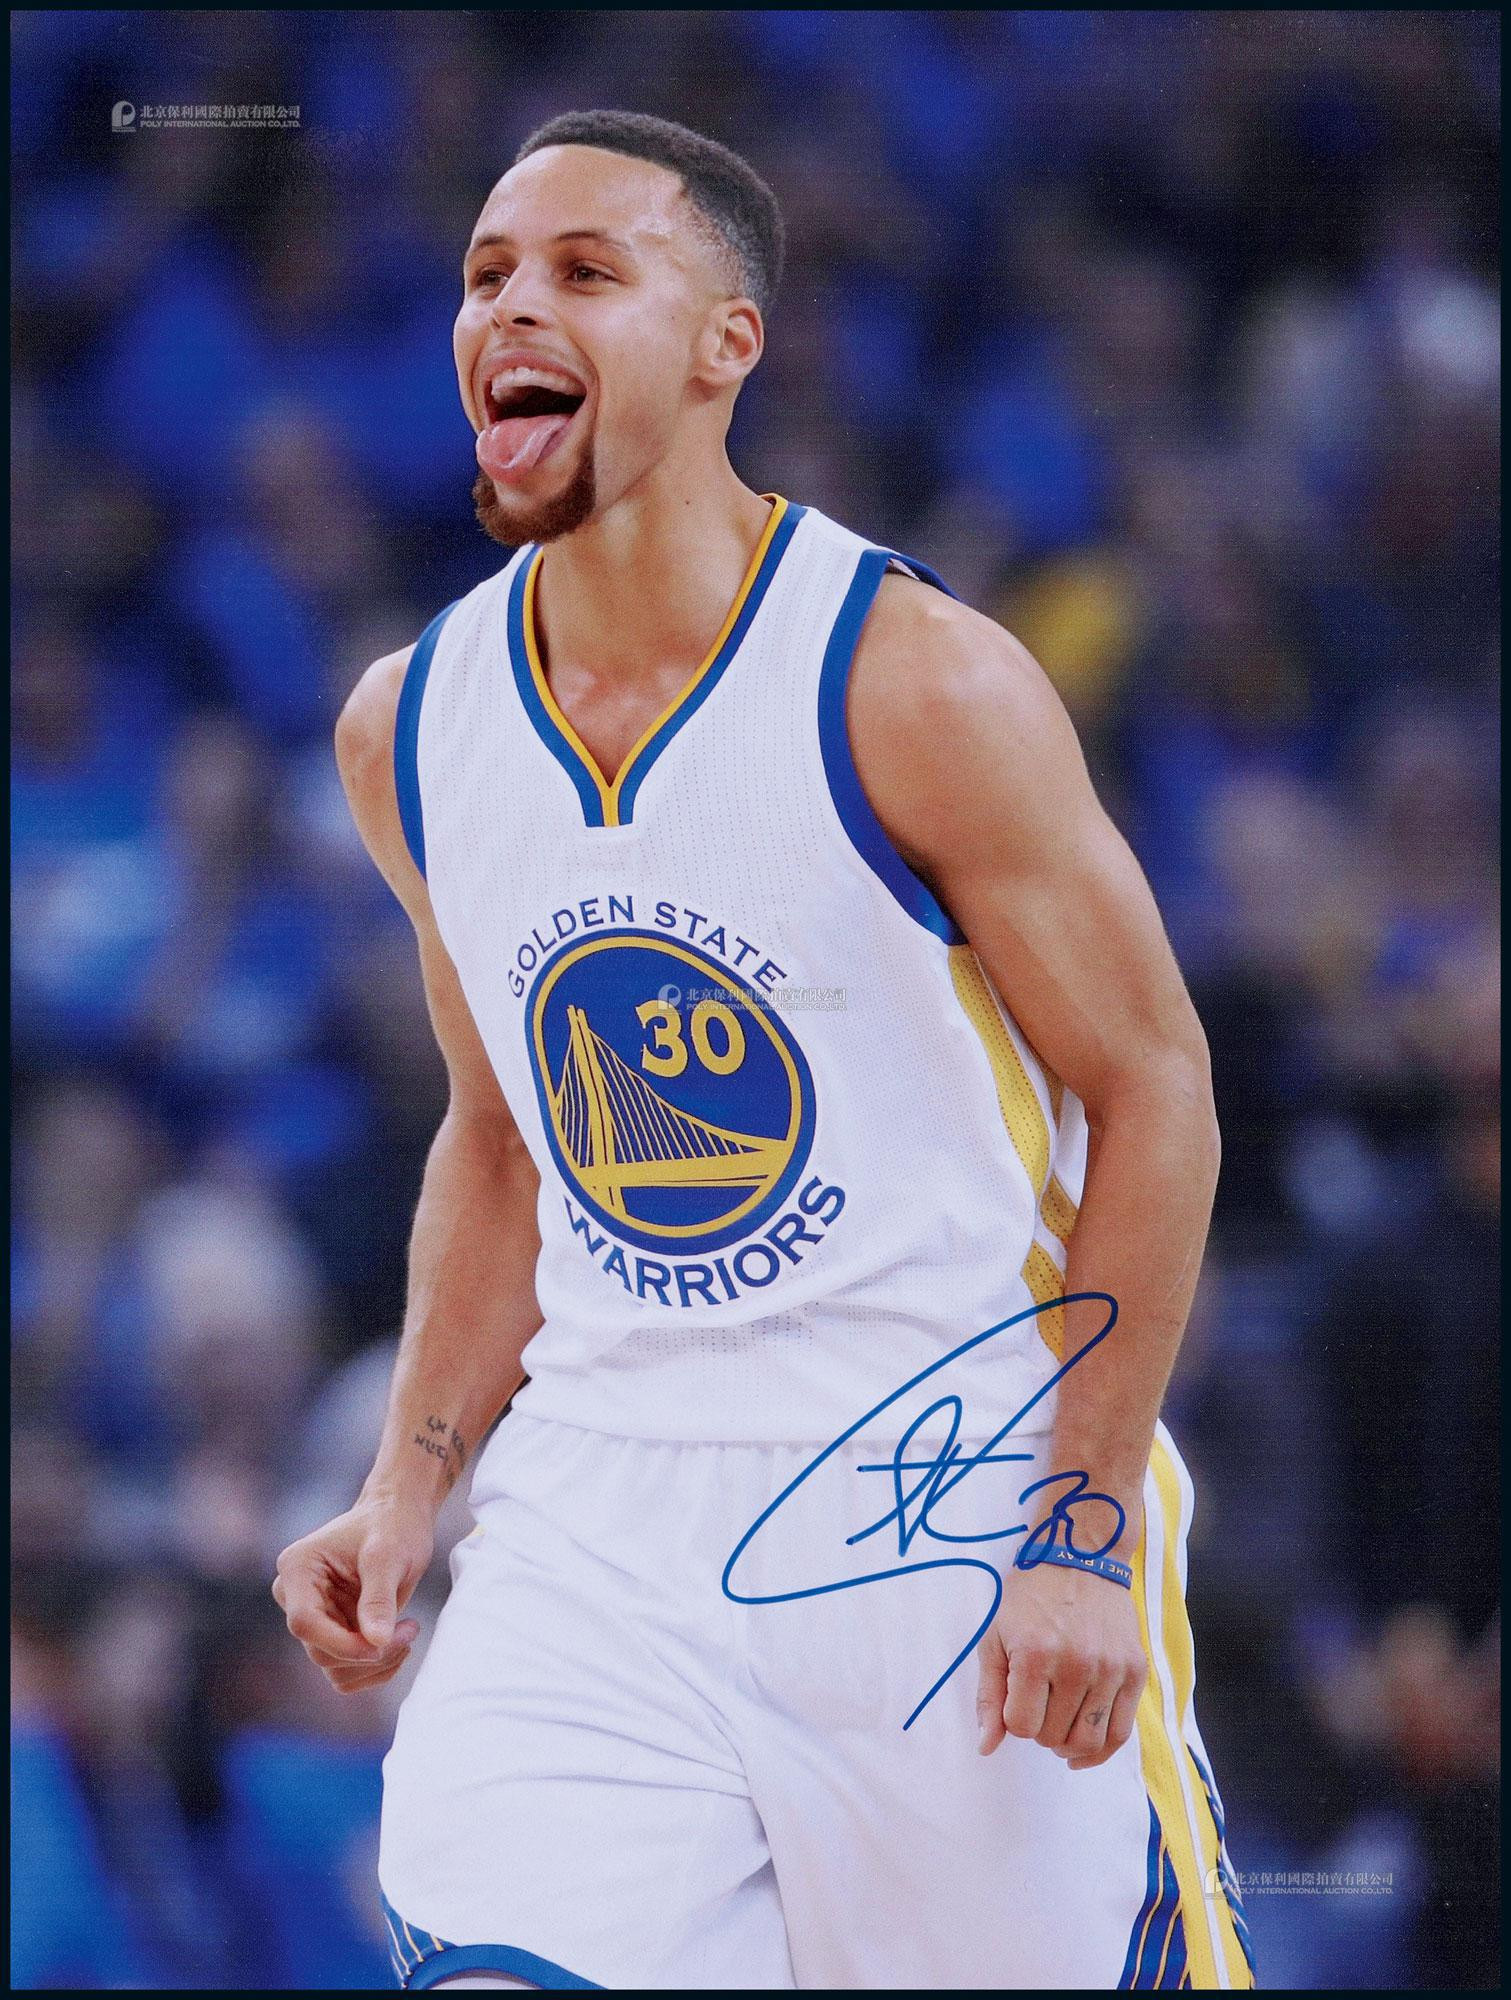 The autographed photo of Stephen Curry, the winner of “NBA MVP”, with certificate